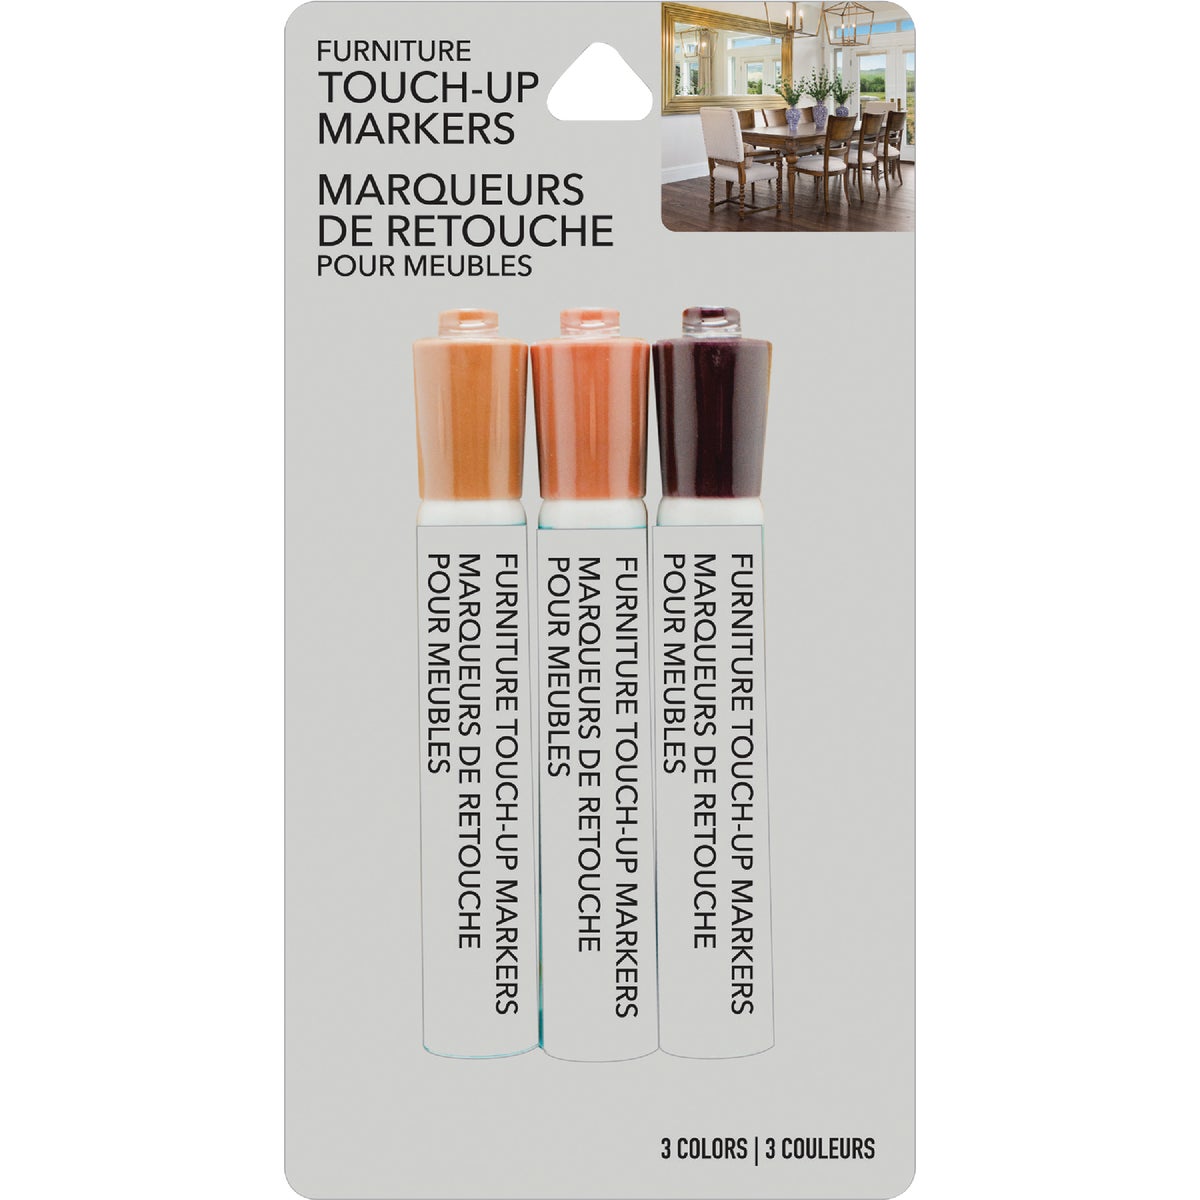 Item 970772, Furniture touch-up markers ideal for covering scratches and worn marks.